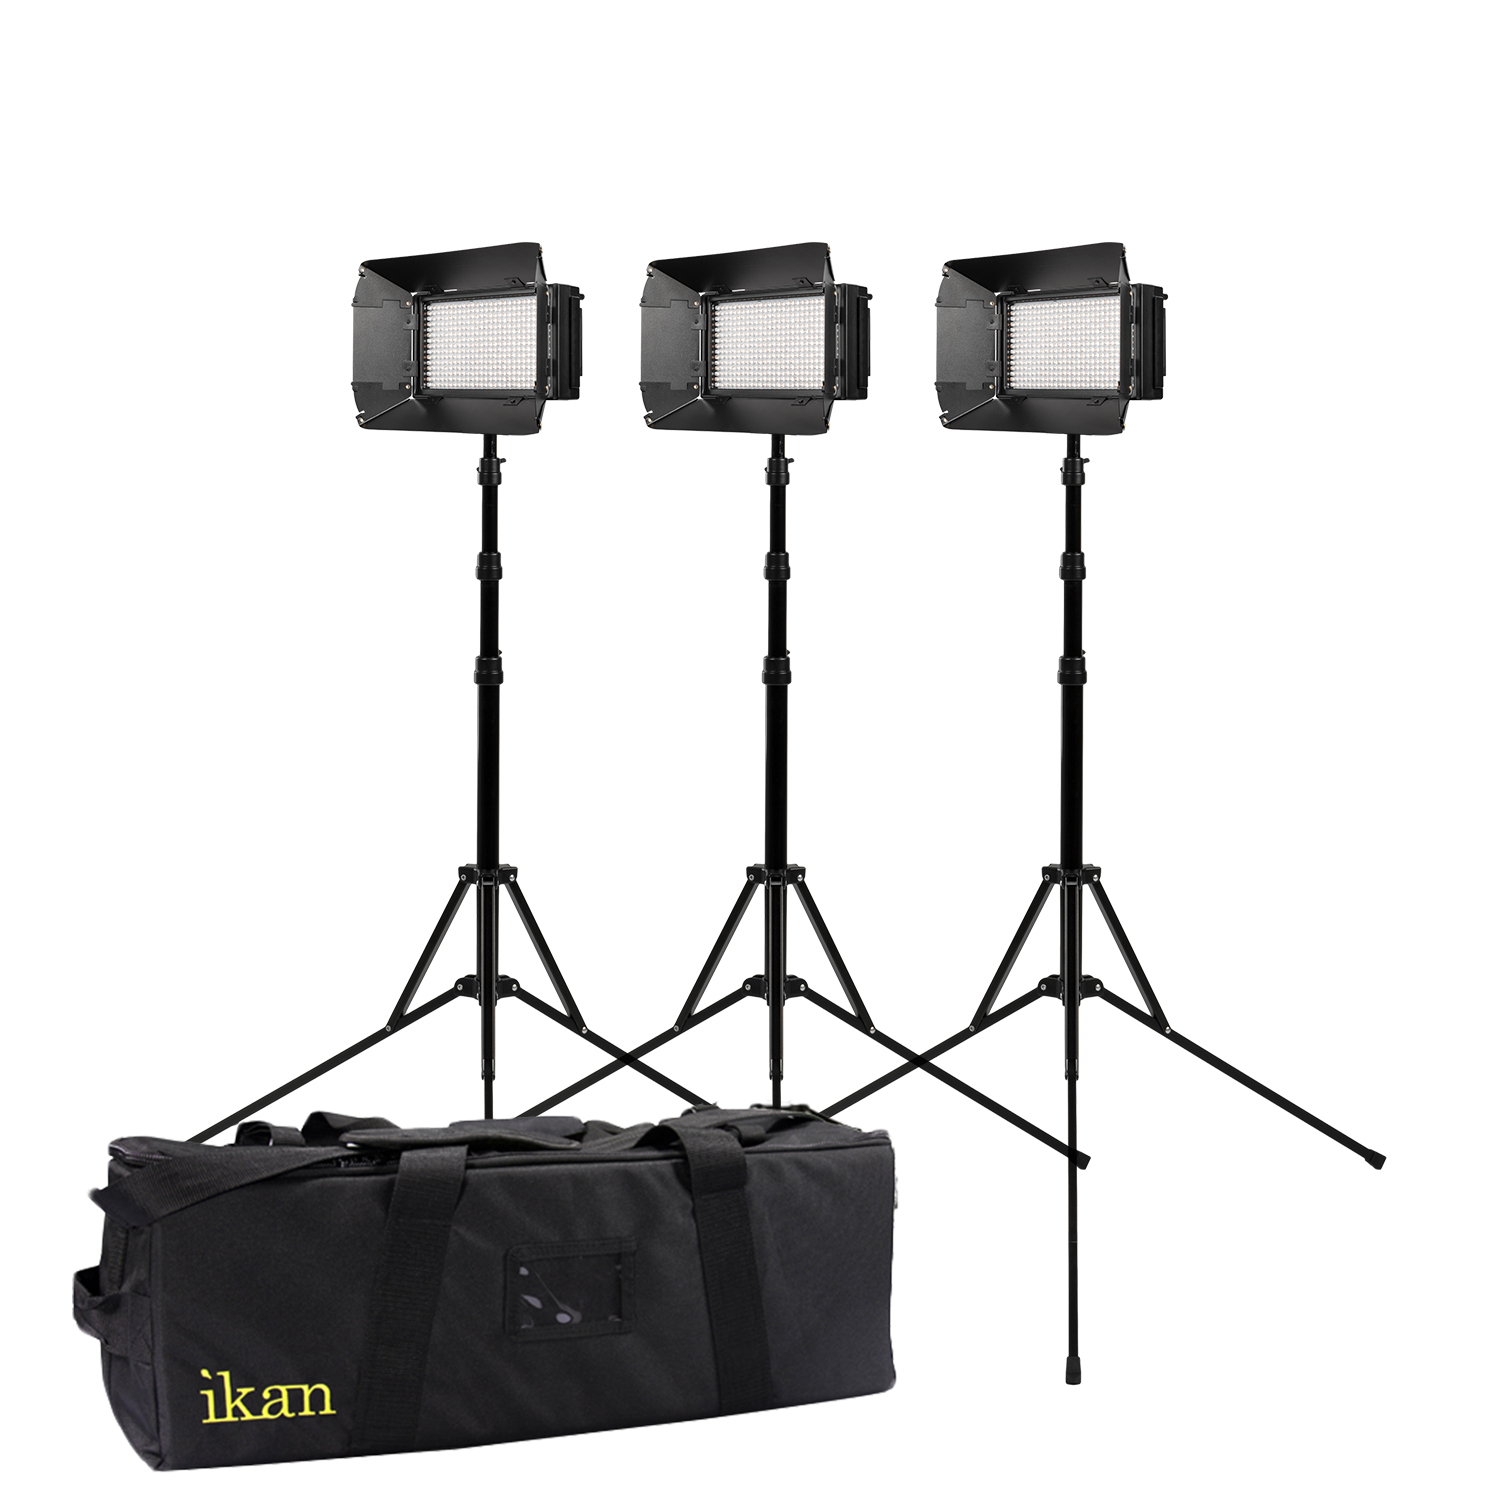 Mylo Mini Bi-Color 3-Point LED Light Kit w/ 3 x MB4, Includes DV Batteries,  Stands, and Bags - Ikan